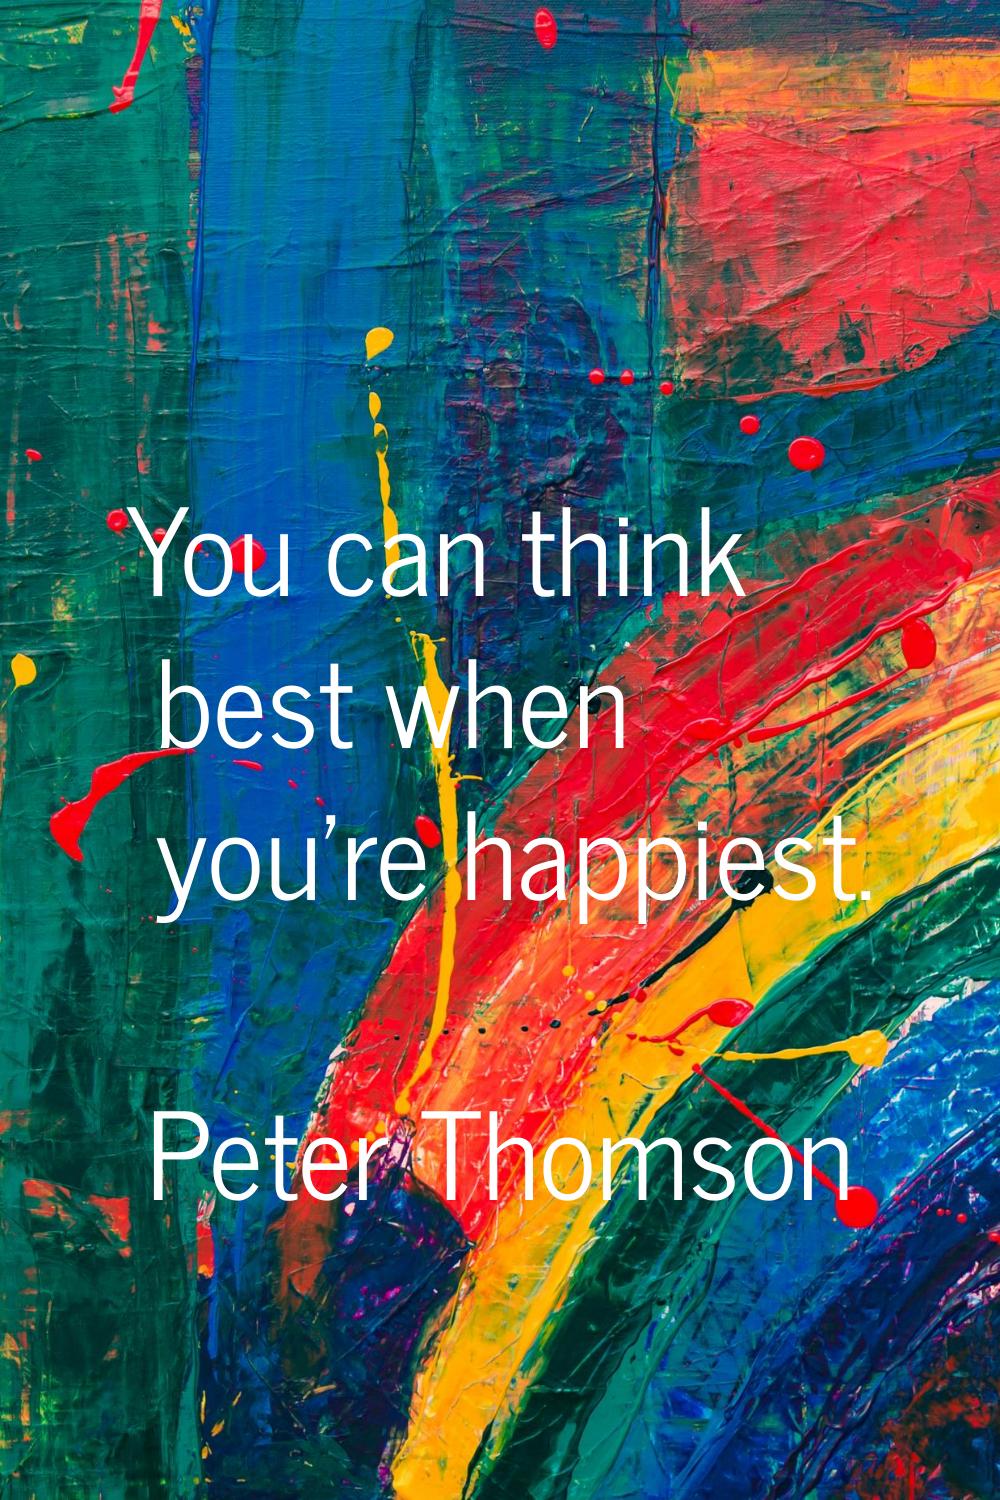 You can think best when you're happiest.